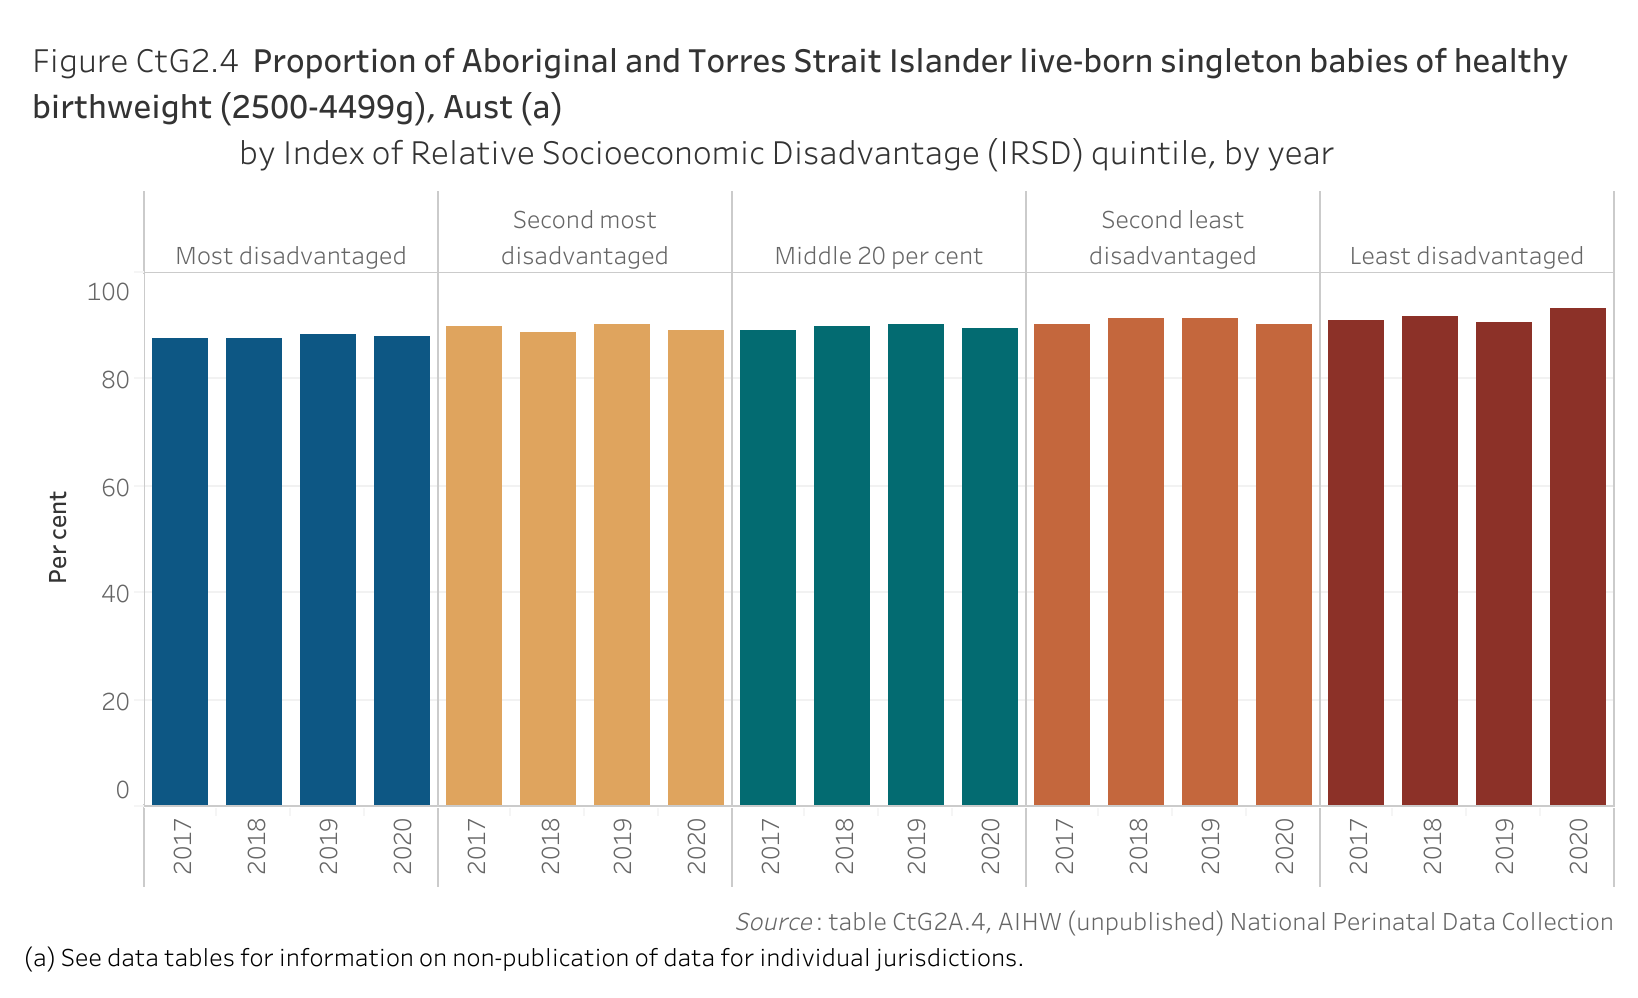 Figure CtG2.4 shows the proportion of Aboriginal and Torres Strait Islander live-born singleton babies of healthy birthweight (2500-4499g), Australia, by Index of Relative Socioeconomic Disadvantage quintile, by year. More details can be found within the text near this image.